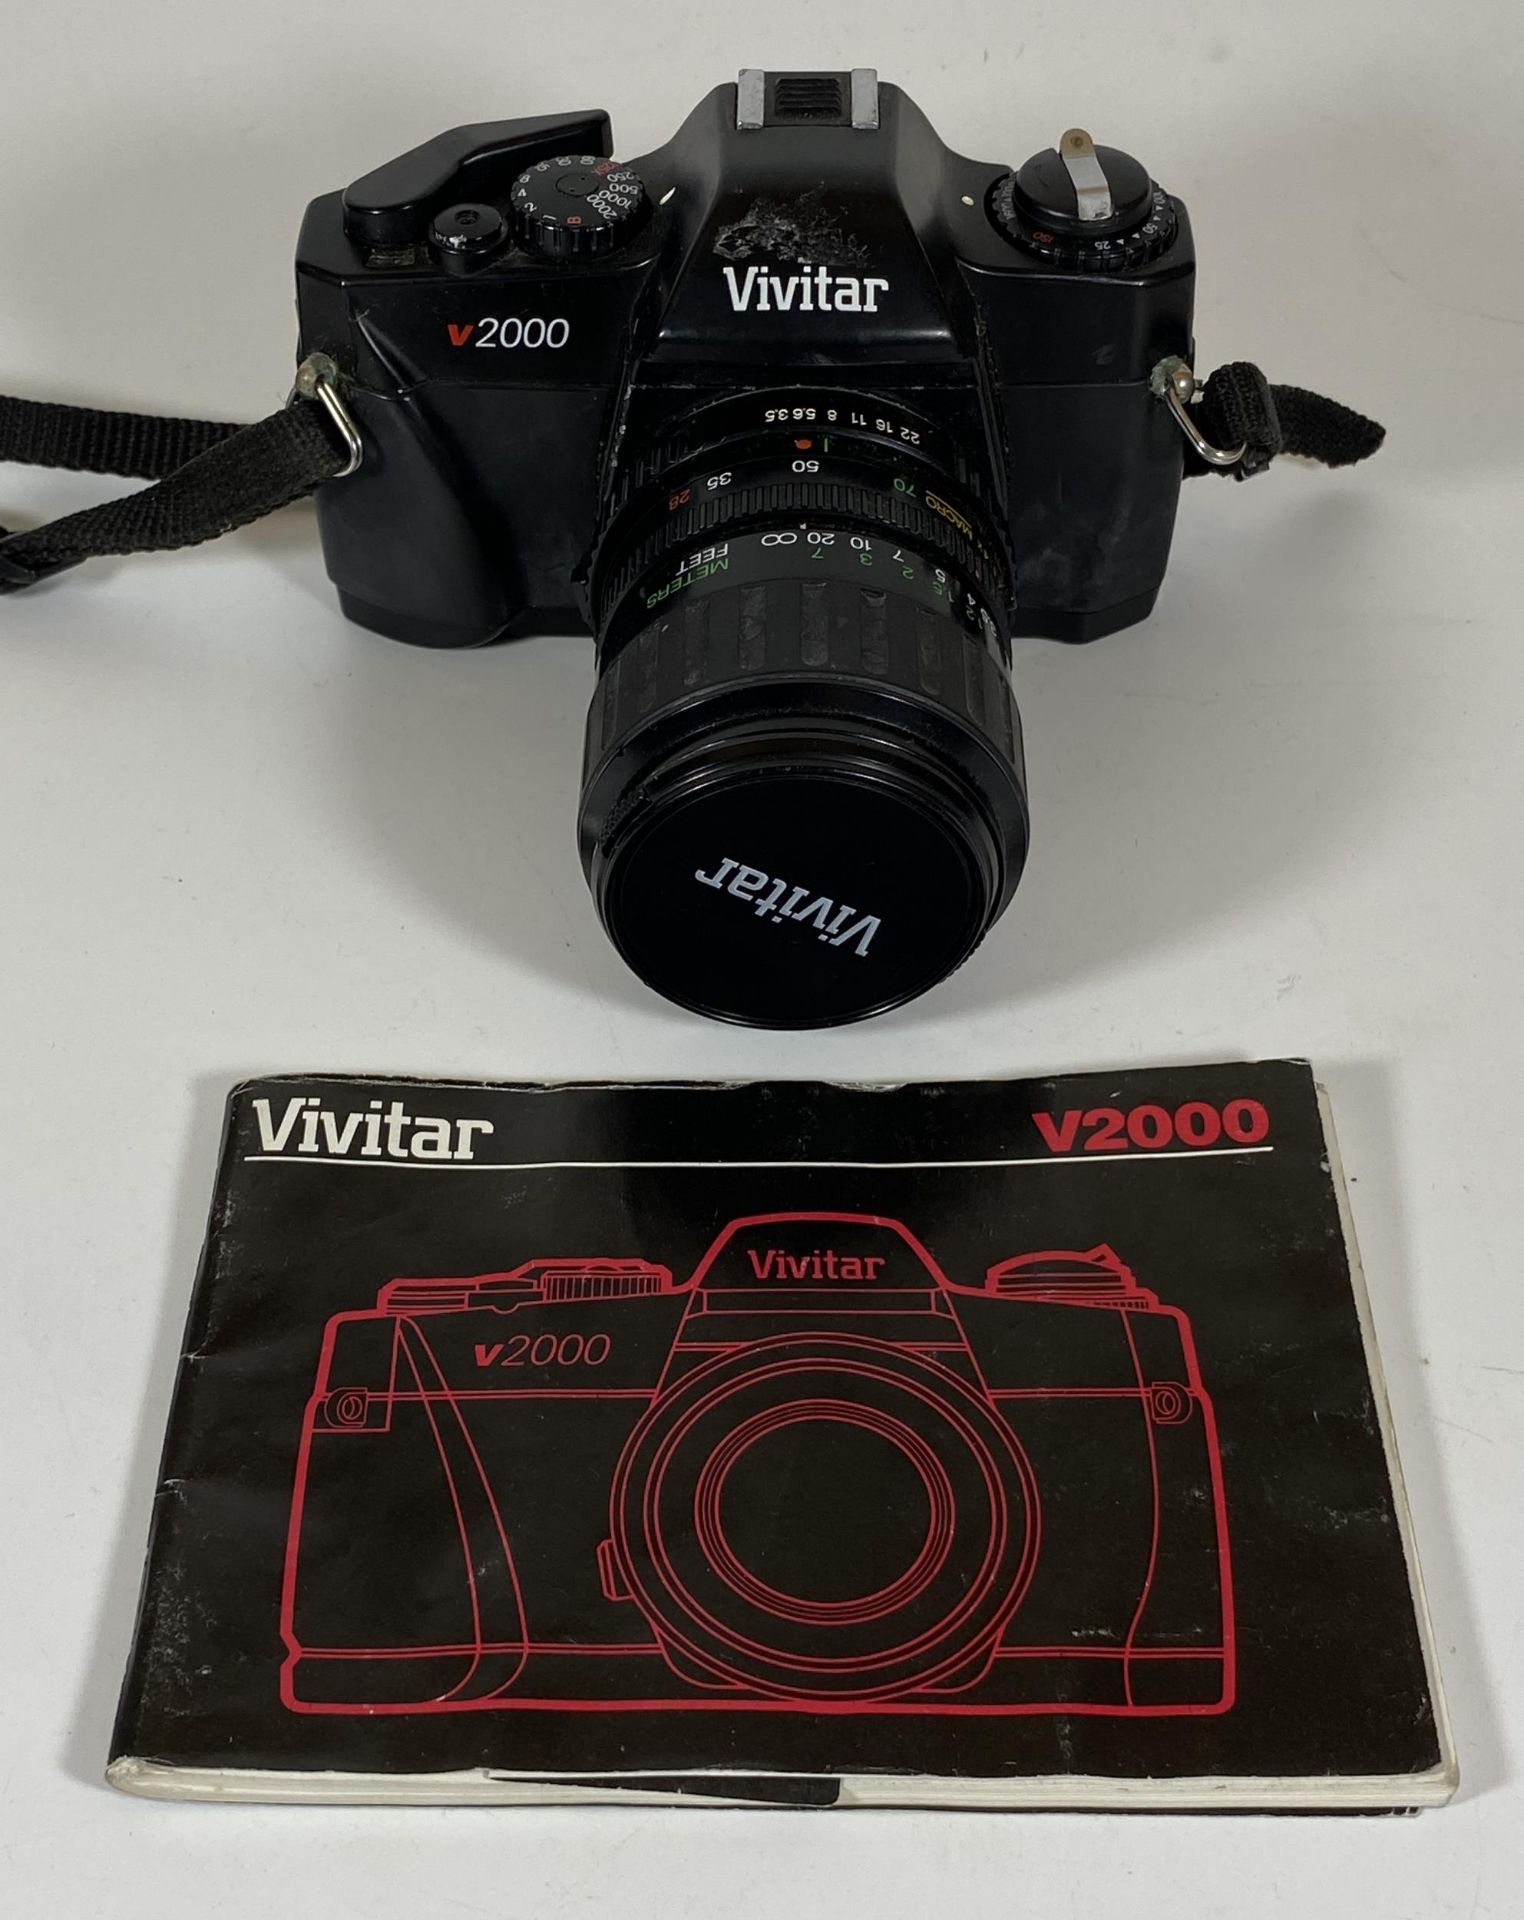 A VIVITAR V2000 CAMERA FITTED WITH VIVITAR MACRO FOCUS ZOOM 28-70MM LENS AND ORIGINAL BOOKLET